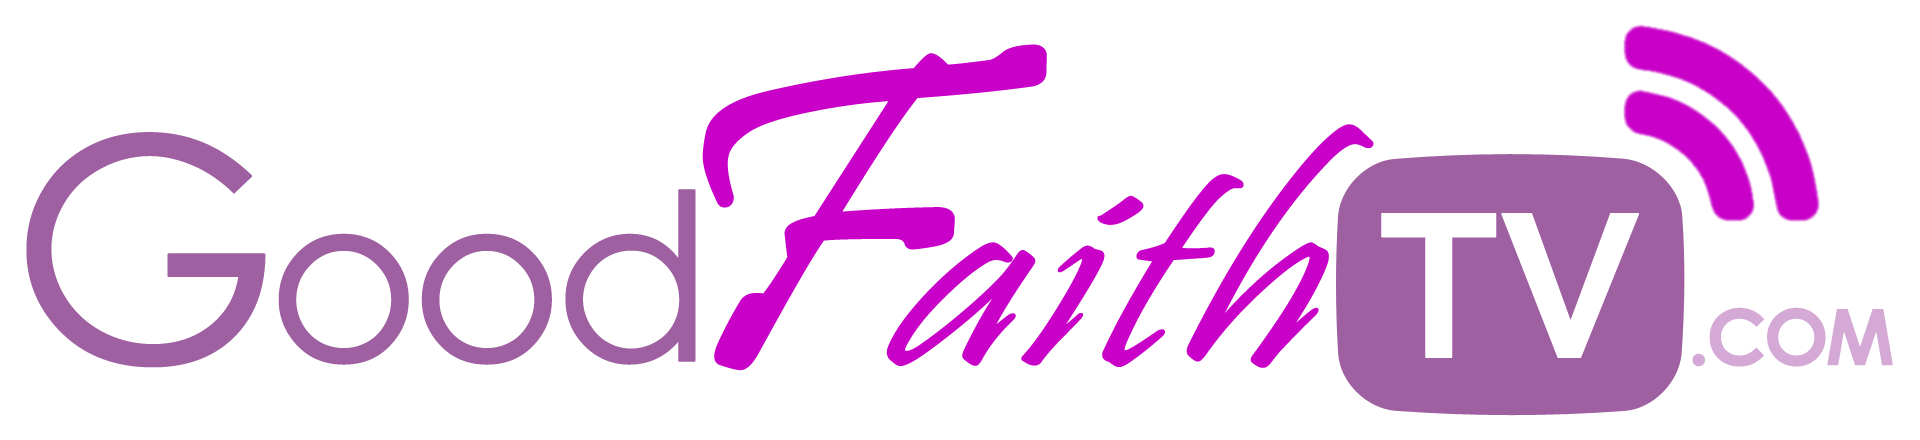 GoodFaithTV.com | Delivering the Message of Faith by Streaming In Good Faith